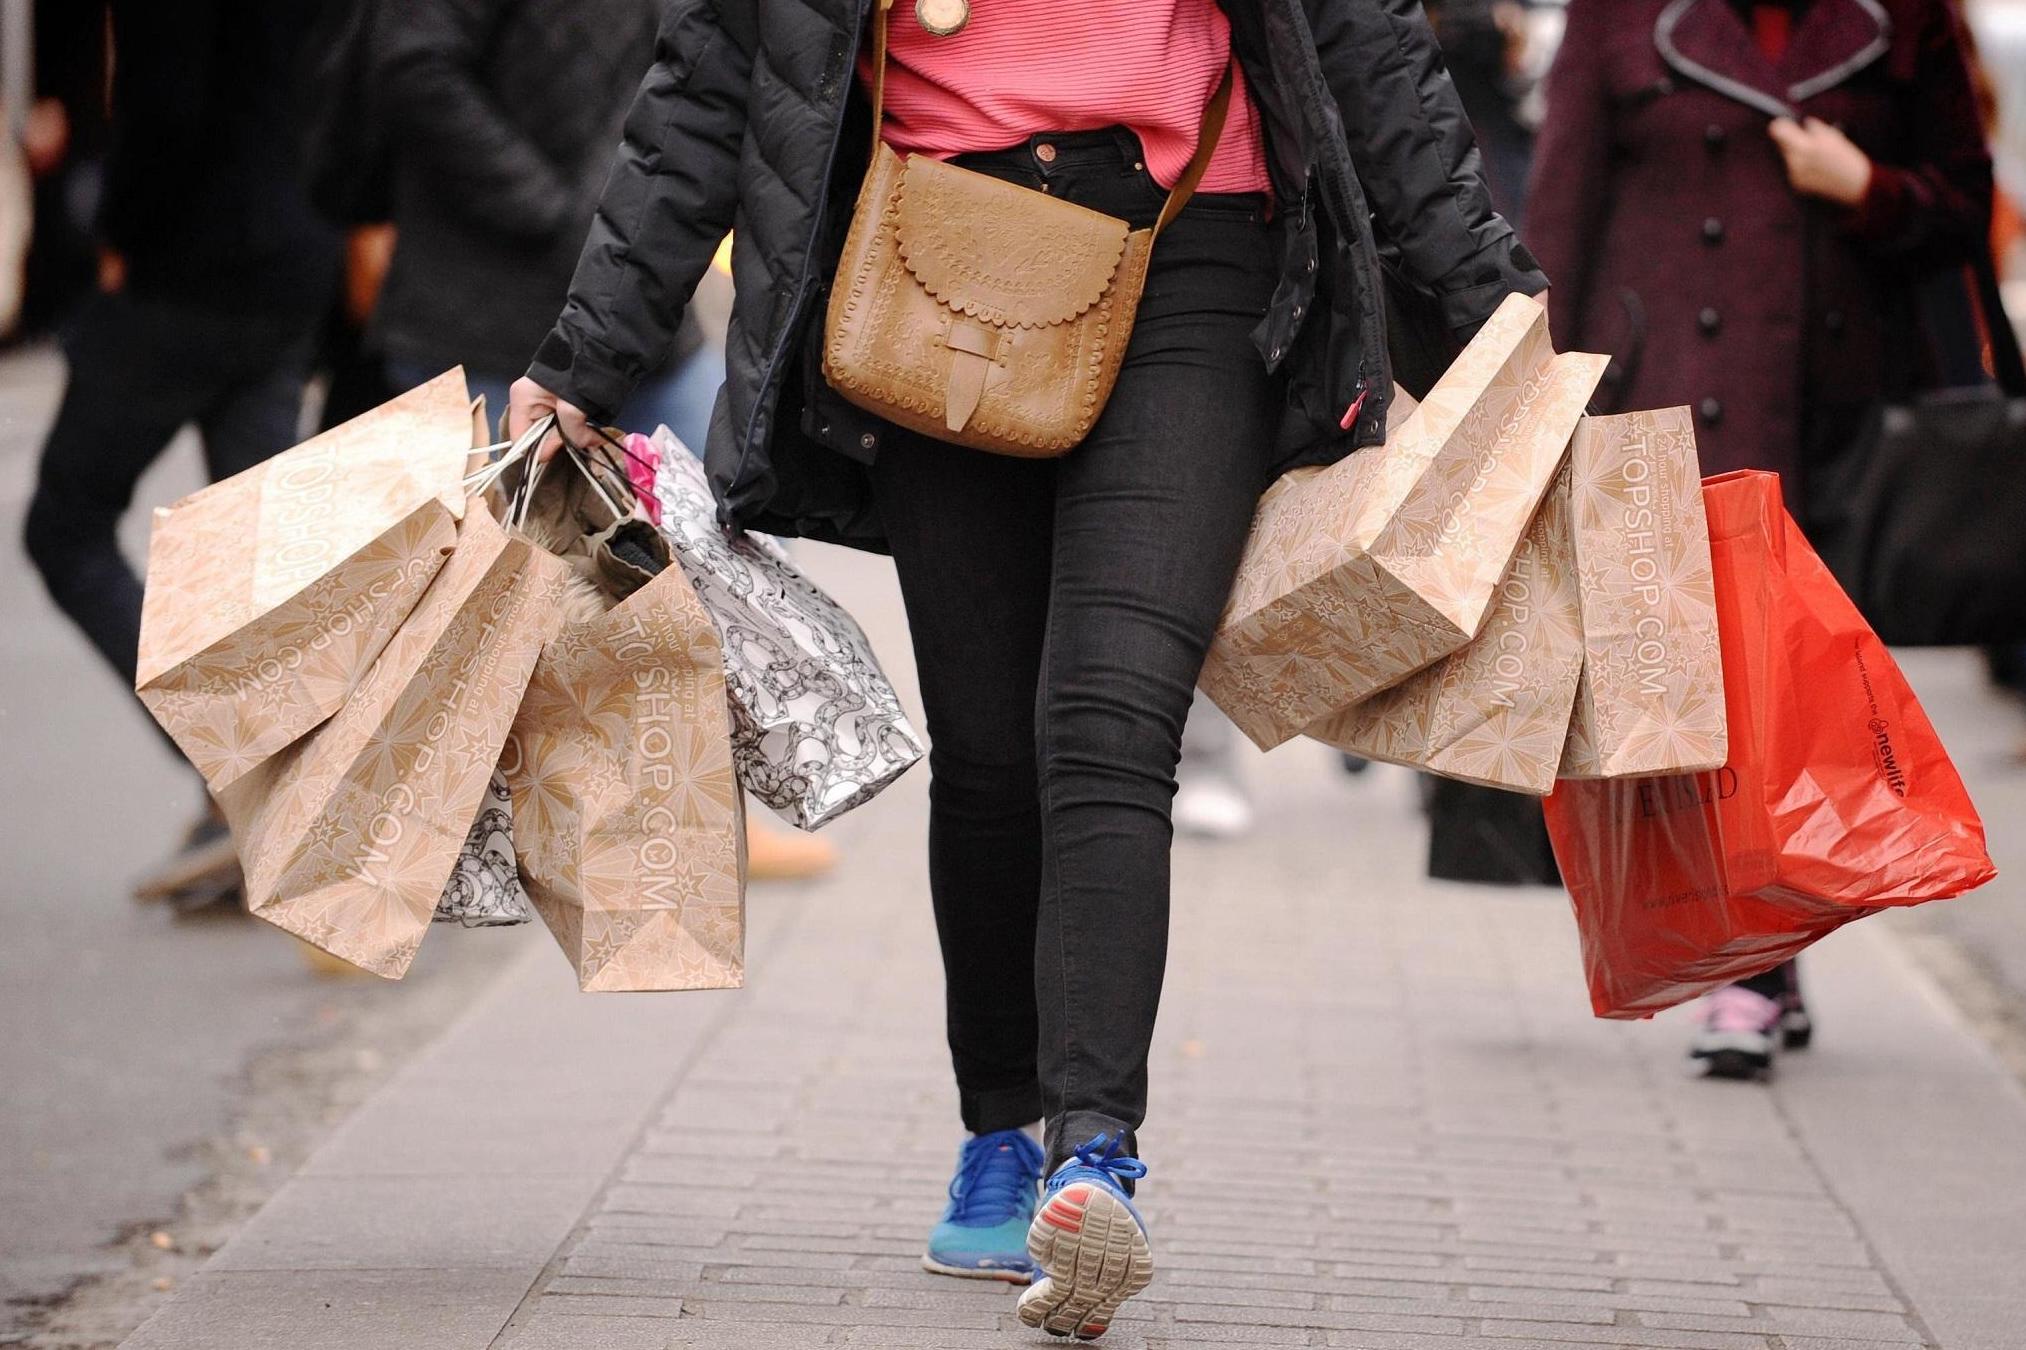 Consumer confidence drops with more forgoing holidays abroad and large purchases